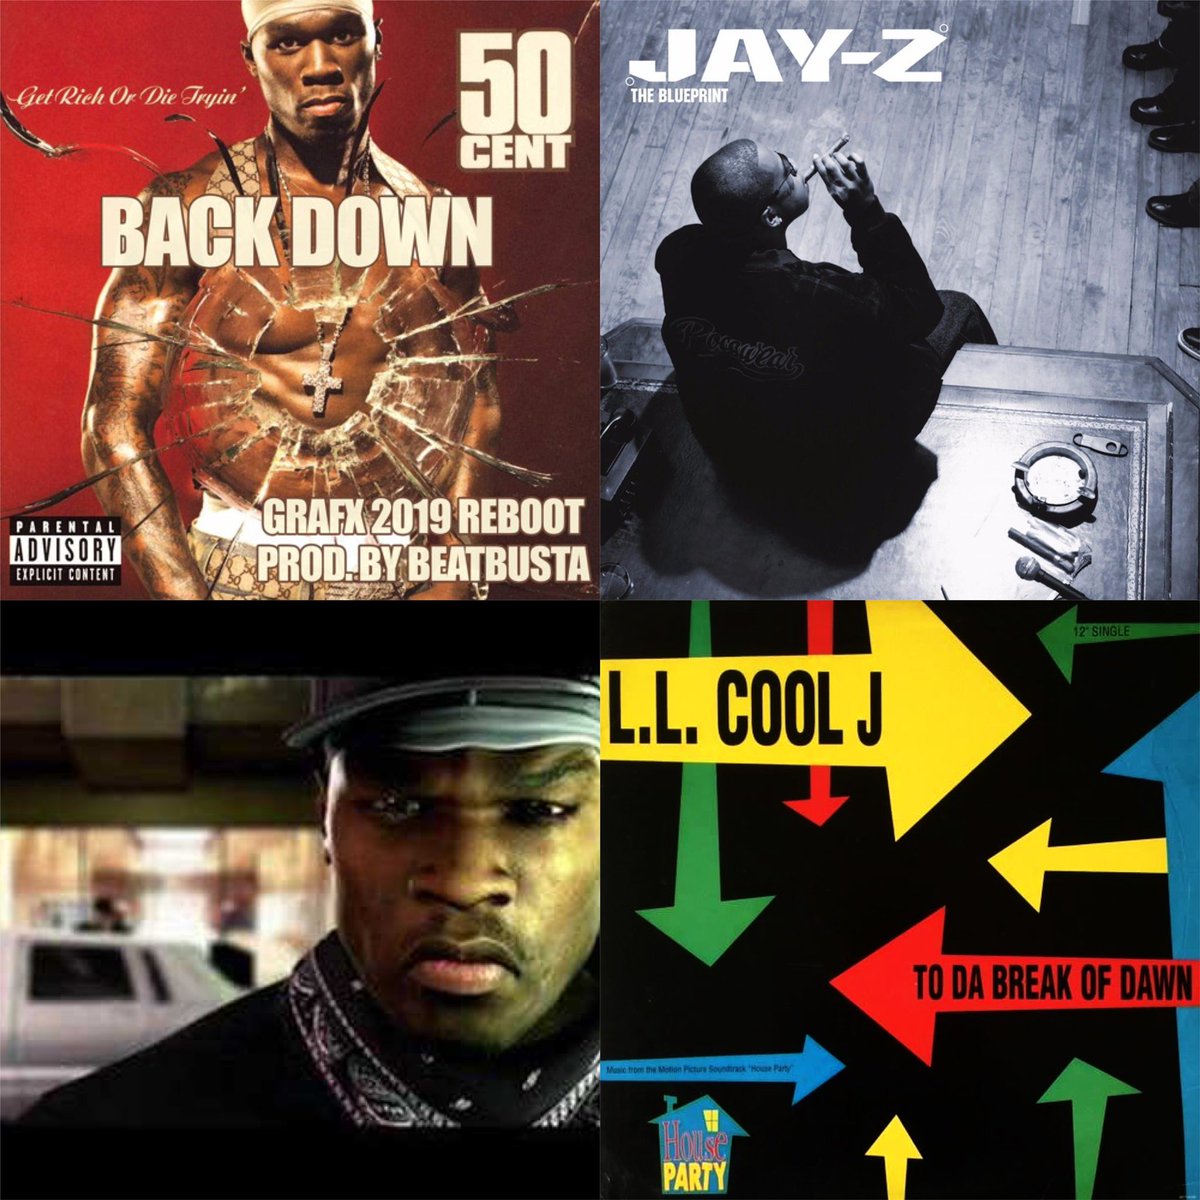 Who had the best diss record? • Hit Em Up• Back To Back• The Story Of Adidon • Killshot • Ether• No Vaseline• Real Muthaphukkin G’s• Rap Devil• Back Down/How to Rob• Takeover• To Da Break Of Dawn